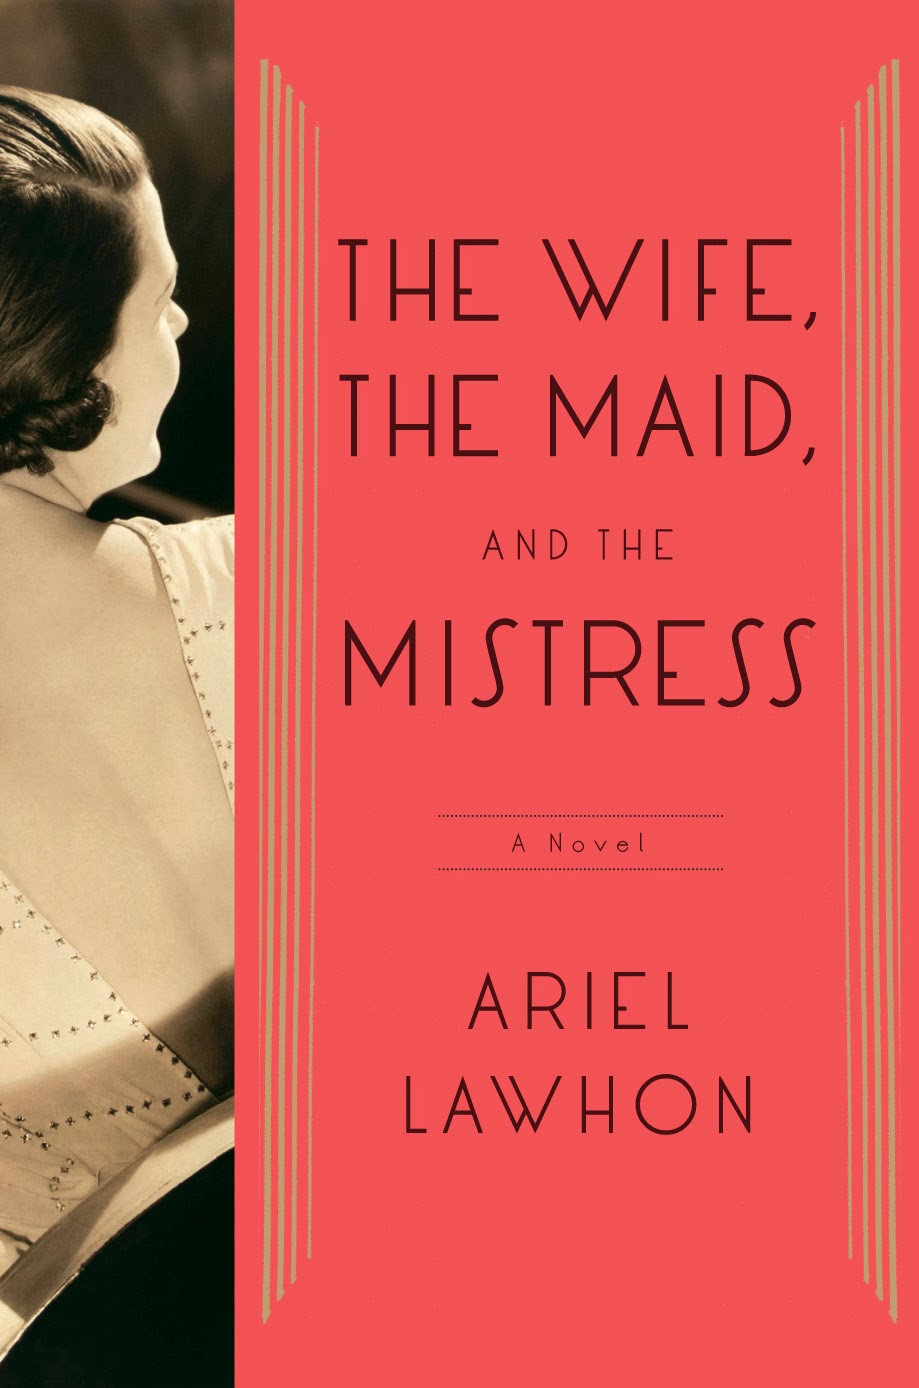 Book Spotlight: The Wife, The Maid, and the Mistress by Ariel Lawhon